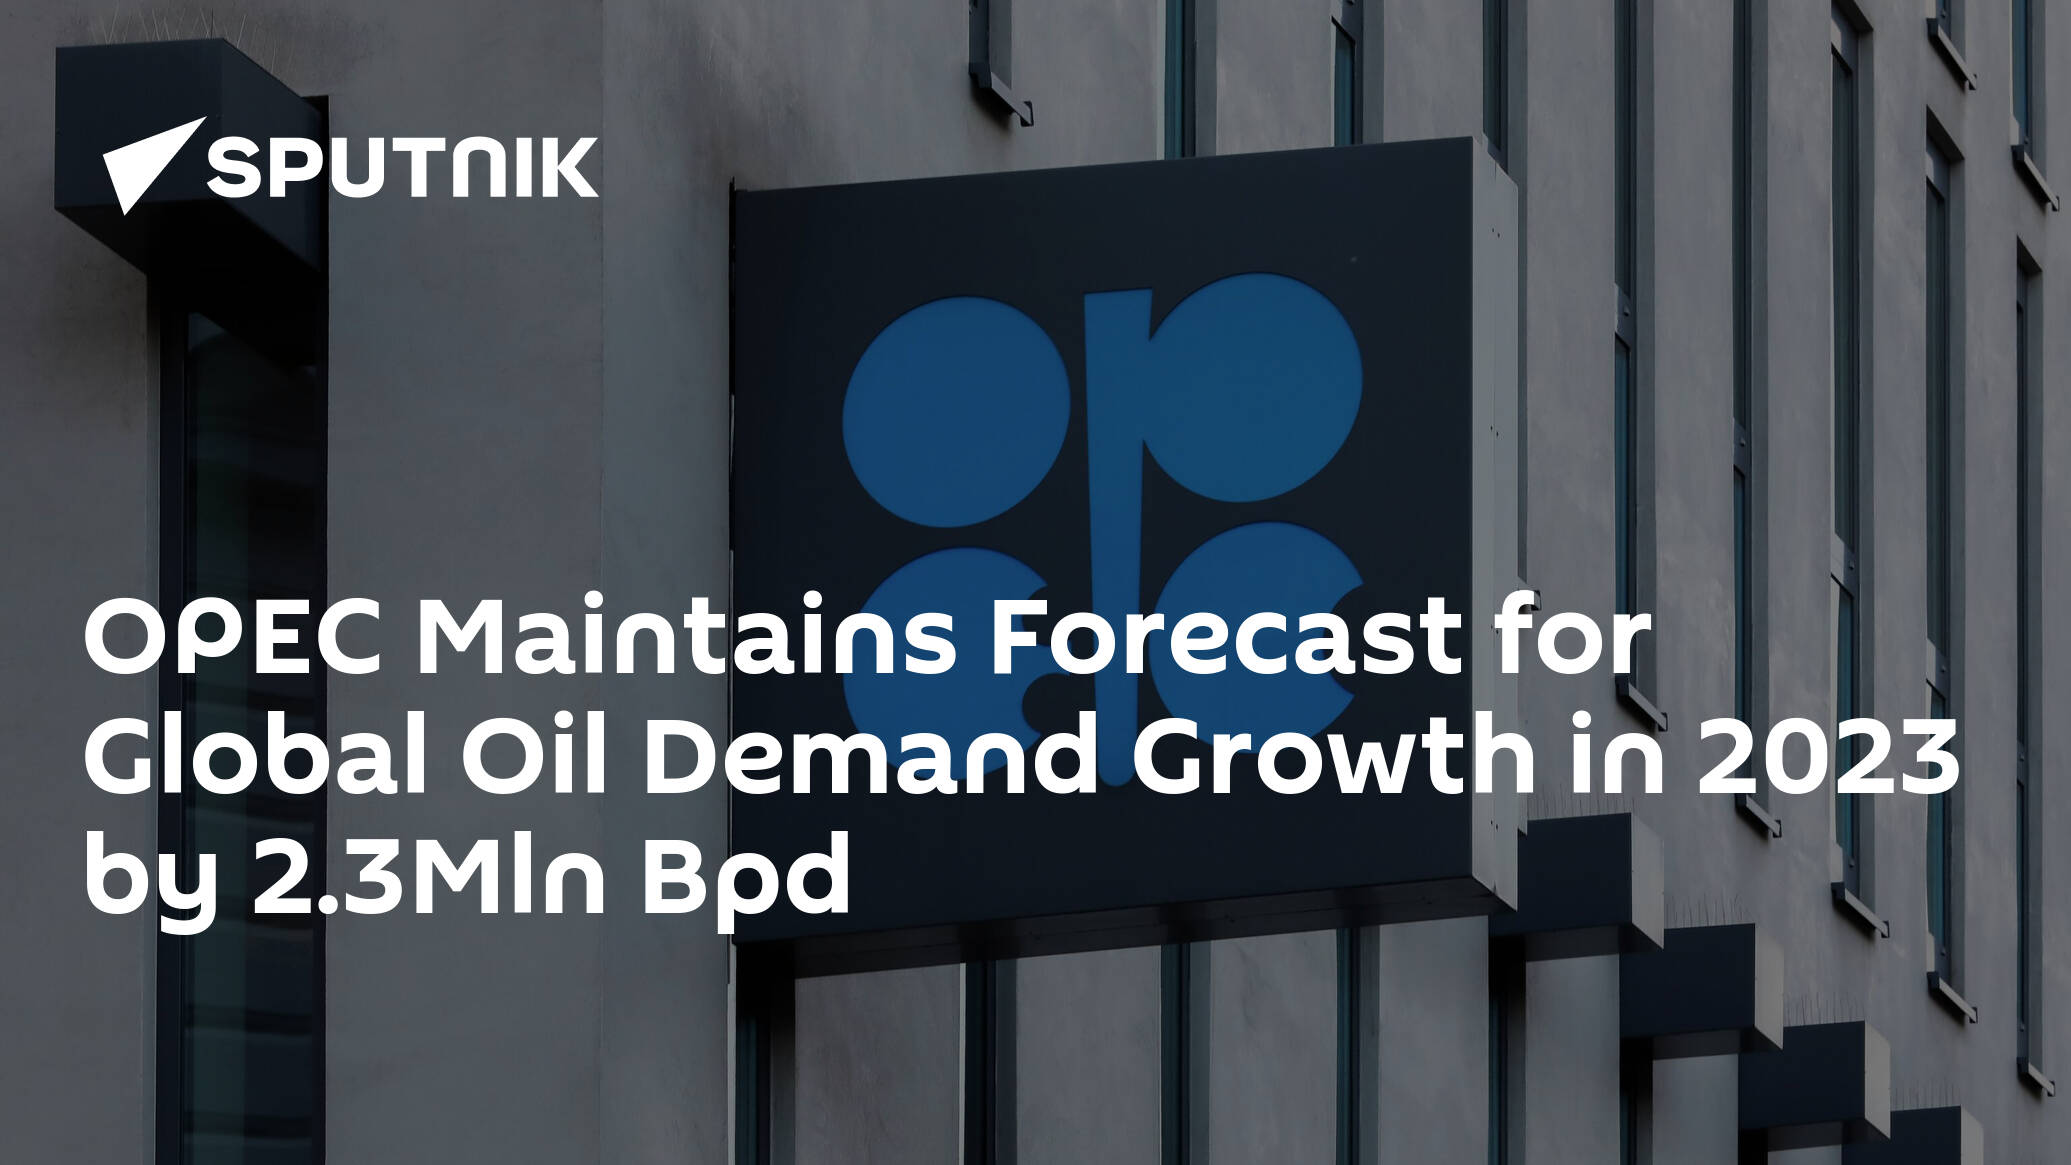 OPEC Maintains Forecast for Global Oil Demand Growth in 2023 by 2.3Mln Bpd – Report